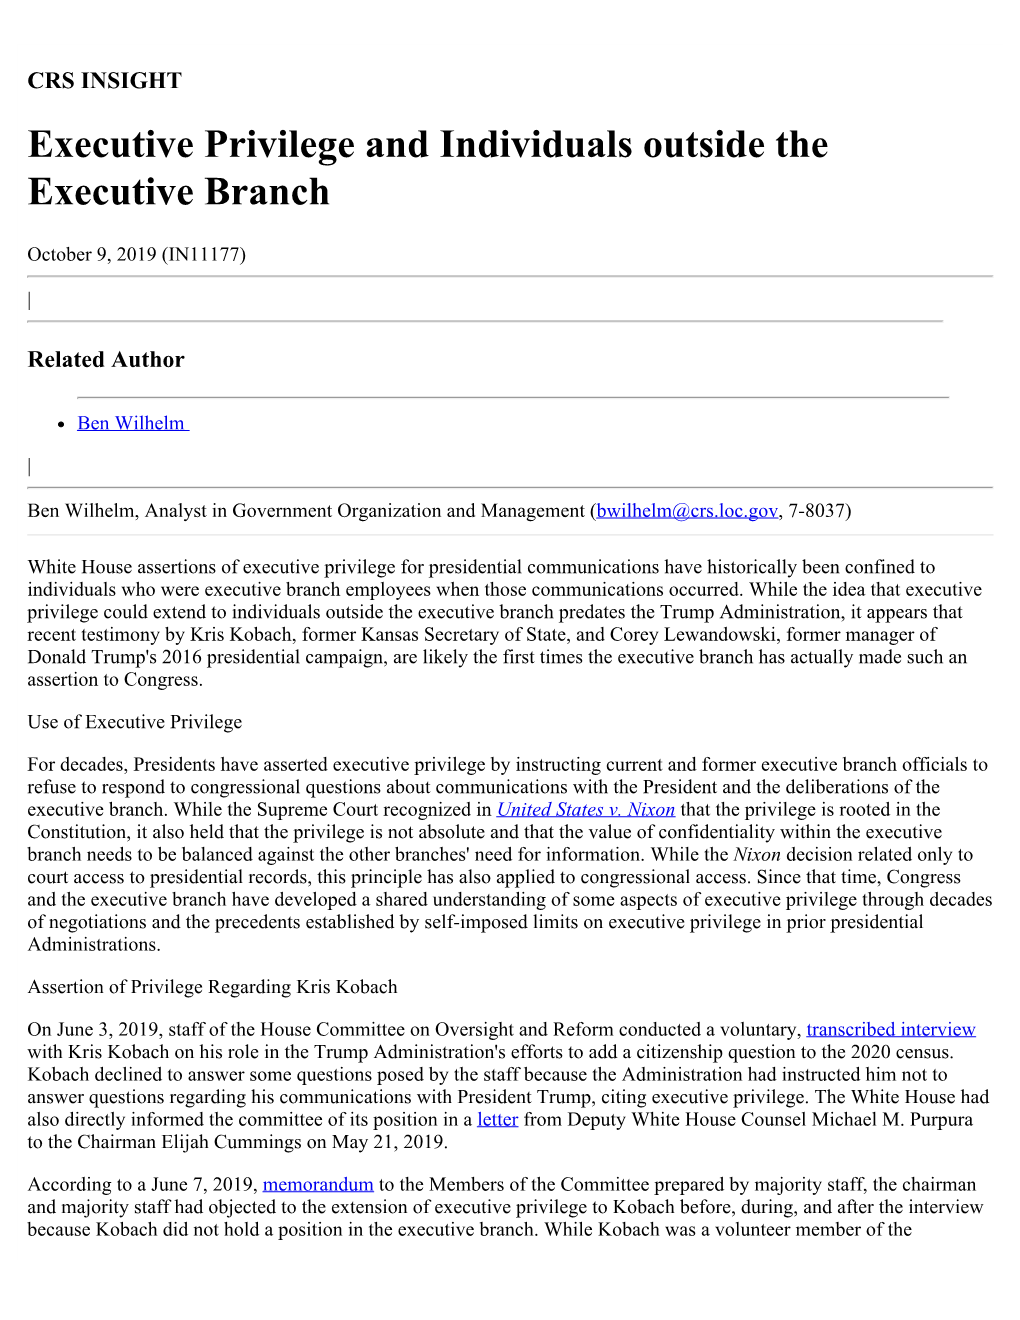 Executive Privilege and Individuals Outside the Executive Branch